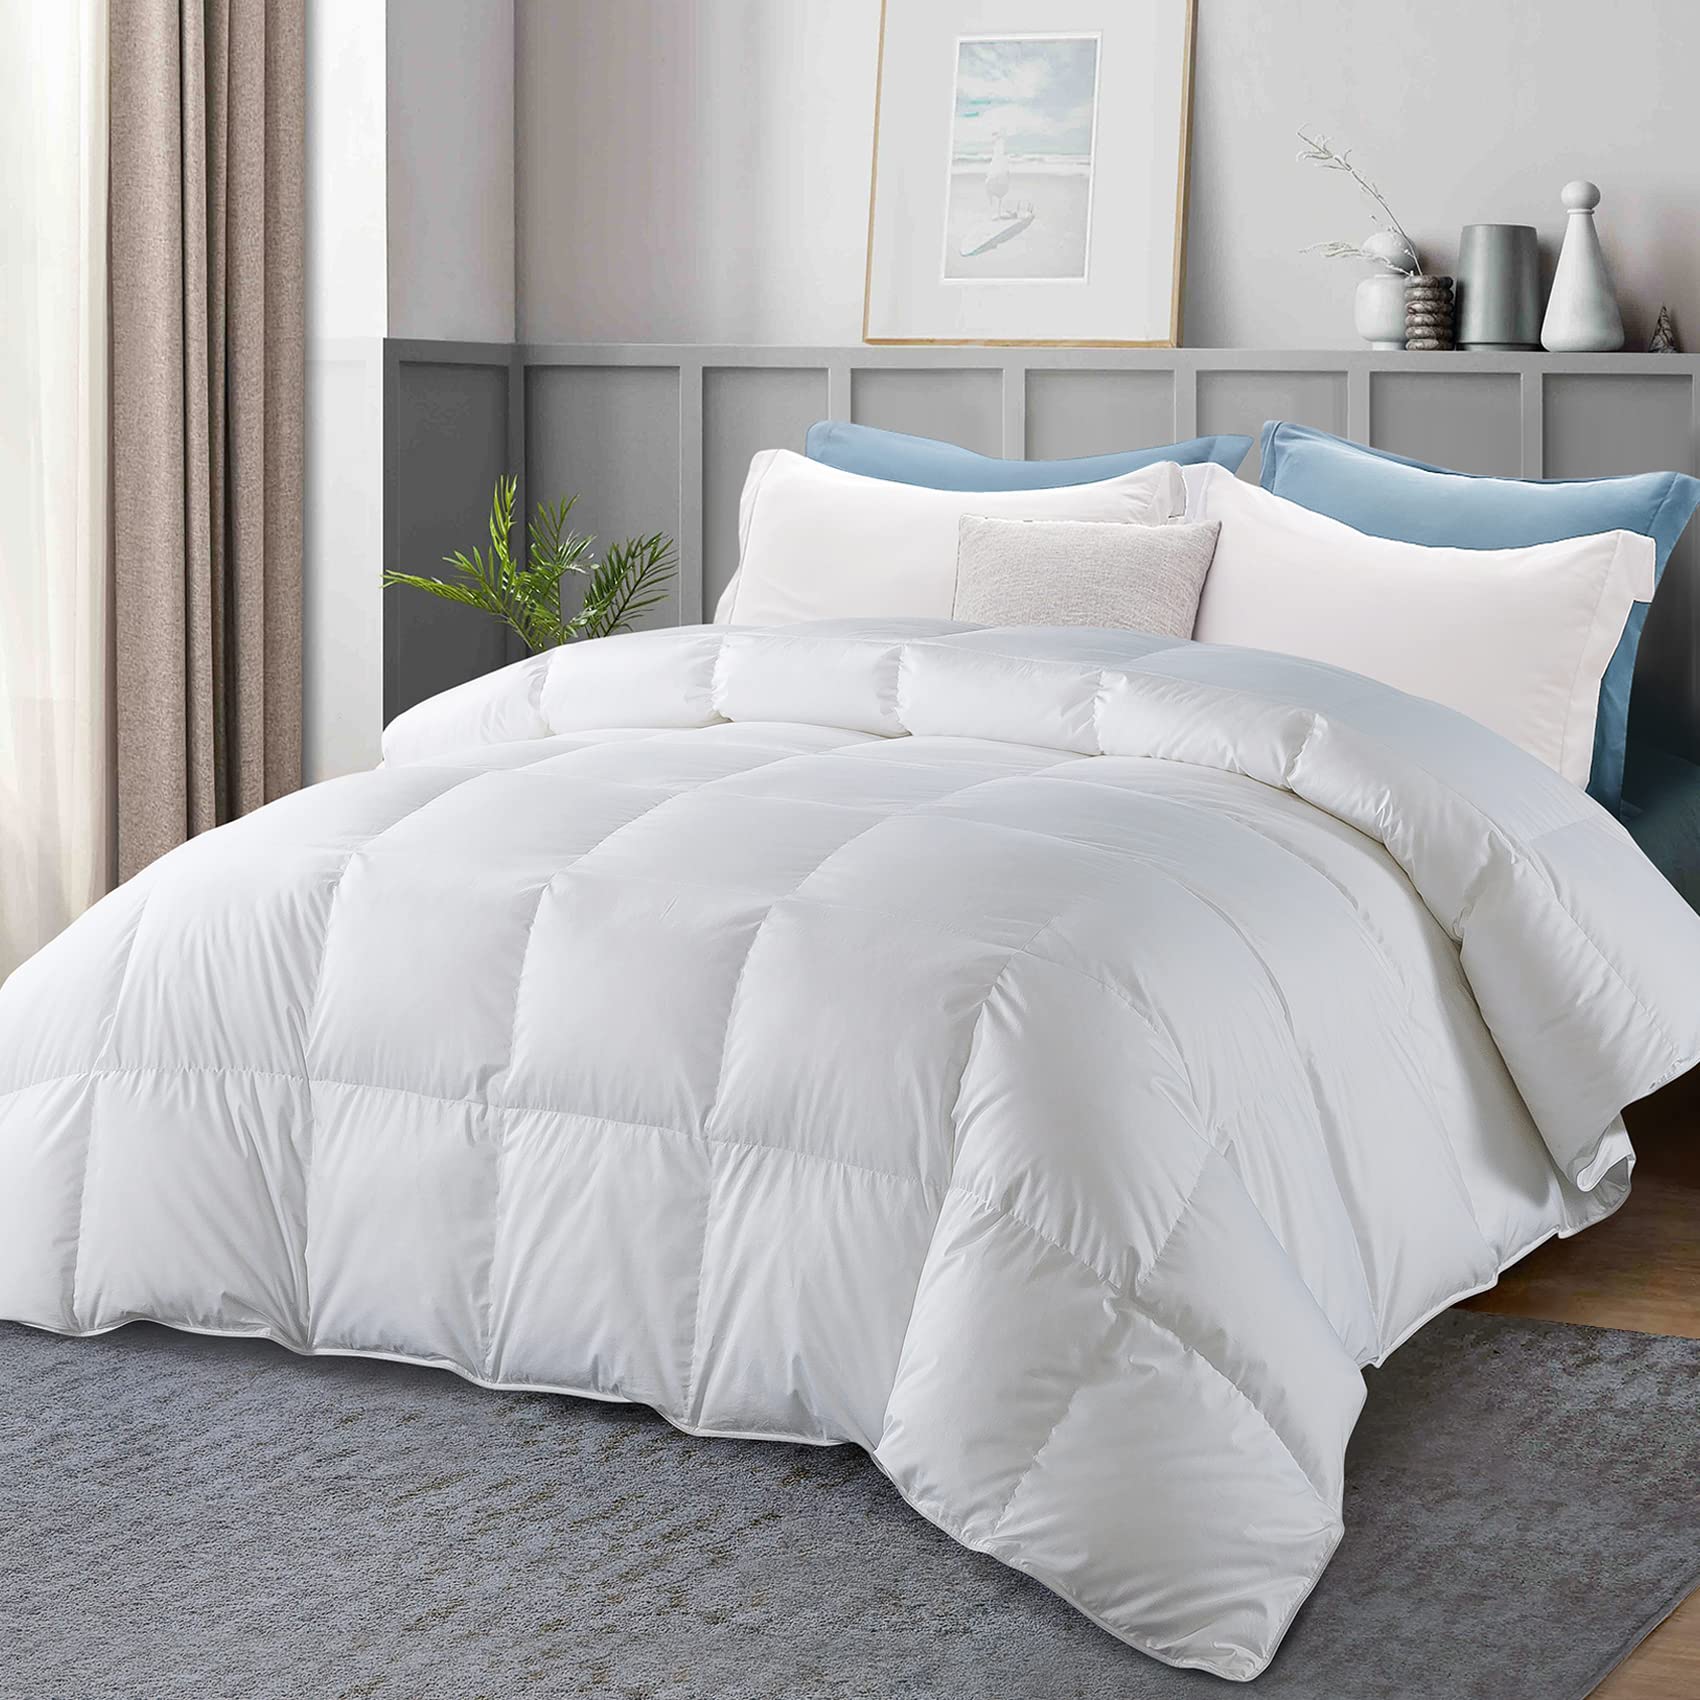 Mua WhatsBedding All Season Goose Feathers and Down Comforter Queen -  Luxurious Hotel Collection Bed Comforter - 100% Cotton Cover White Medium  Warmth Duvet Insert with Corner Tabs -Queen 90x90 Inch trên